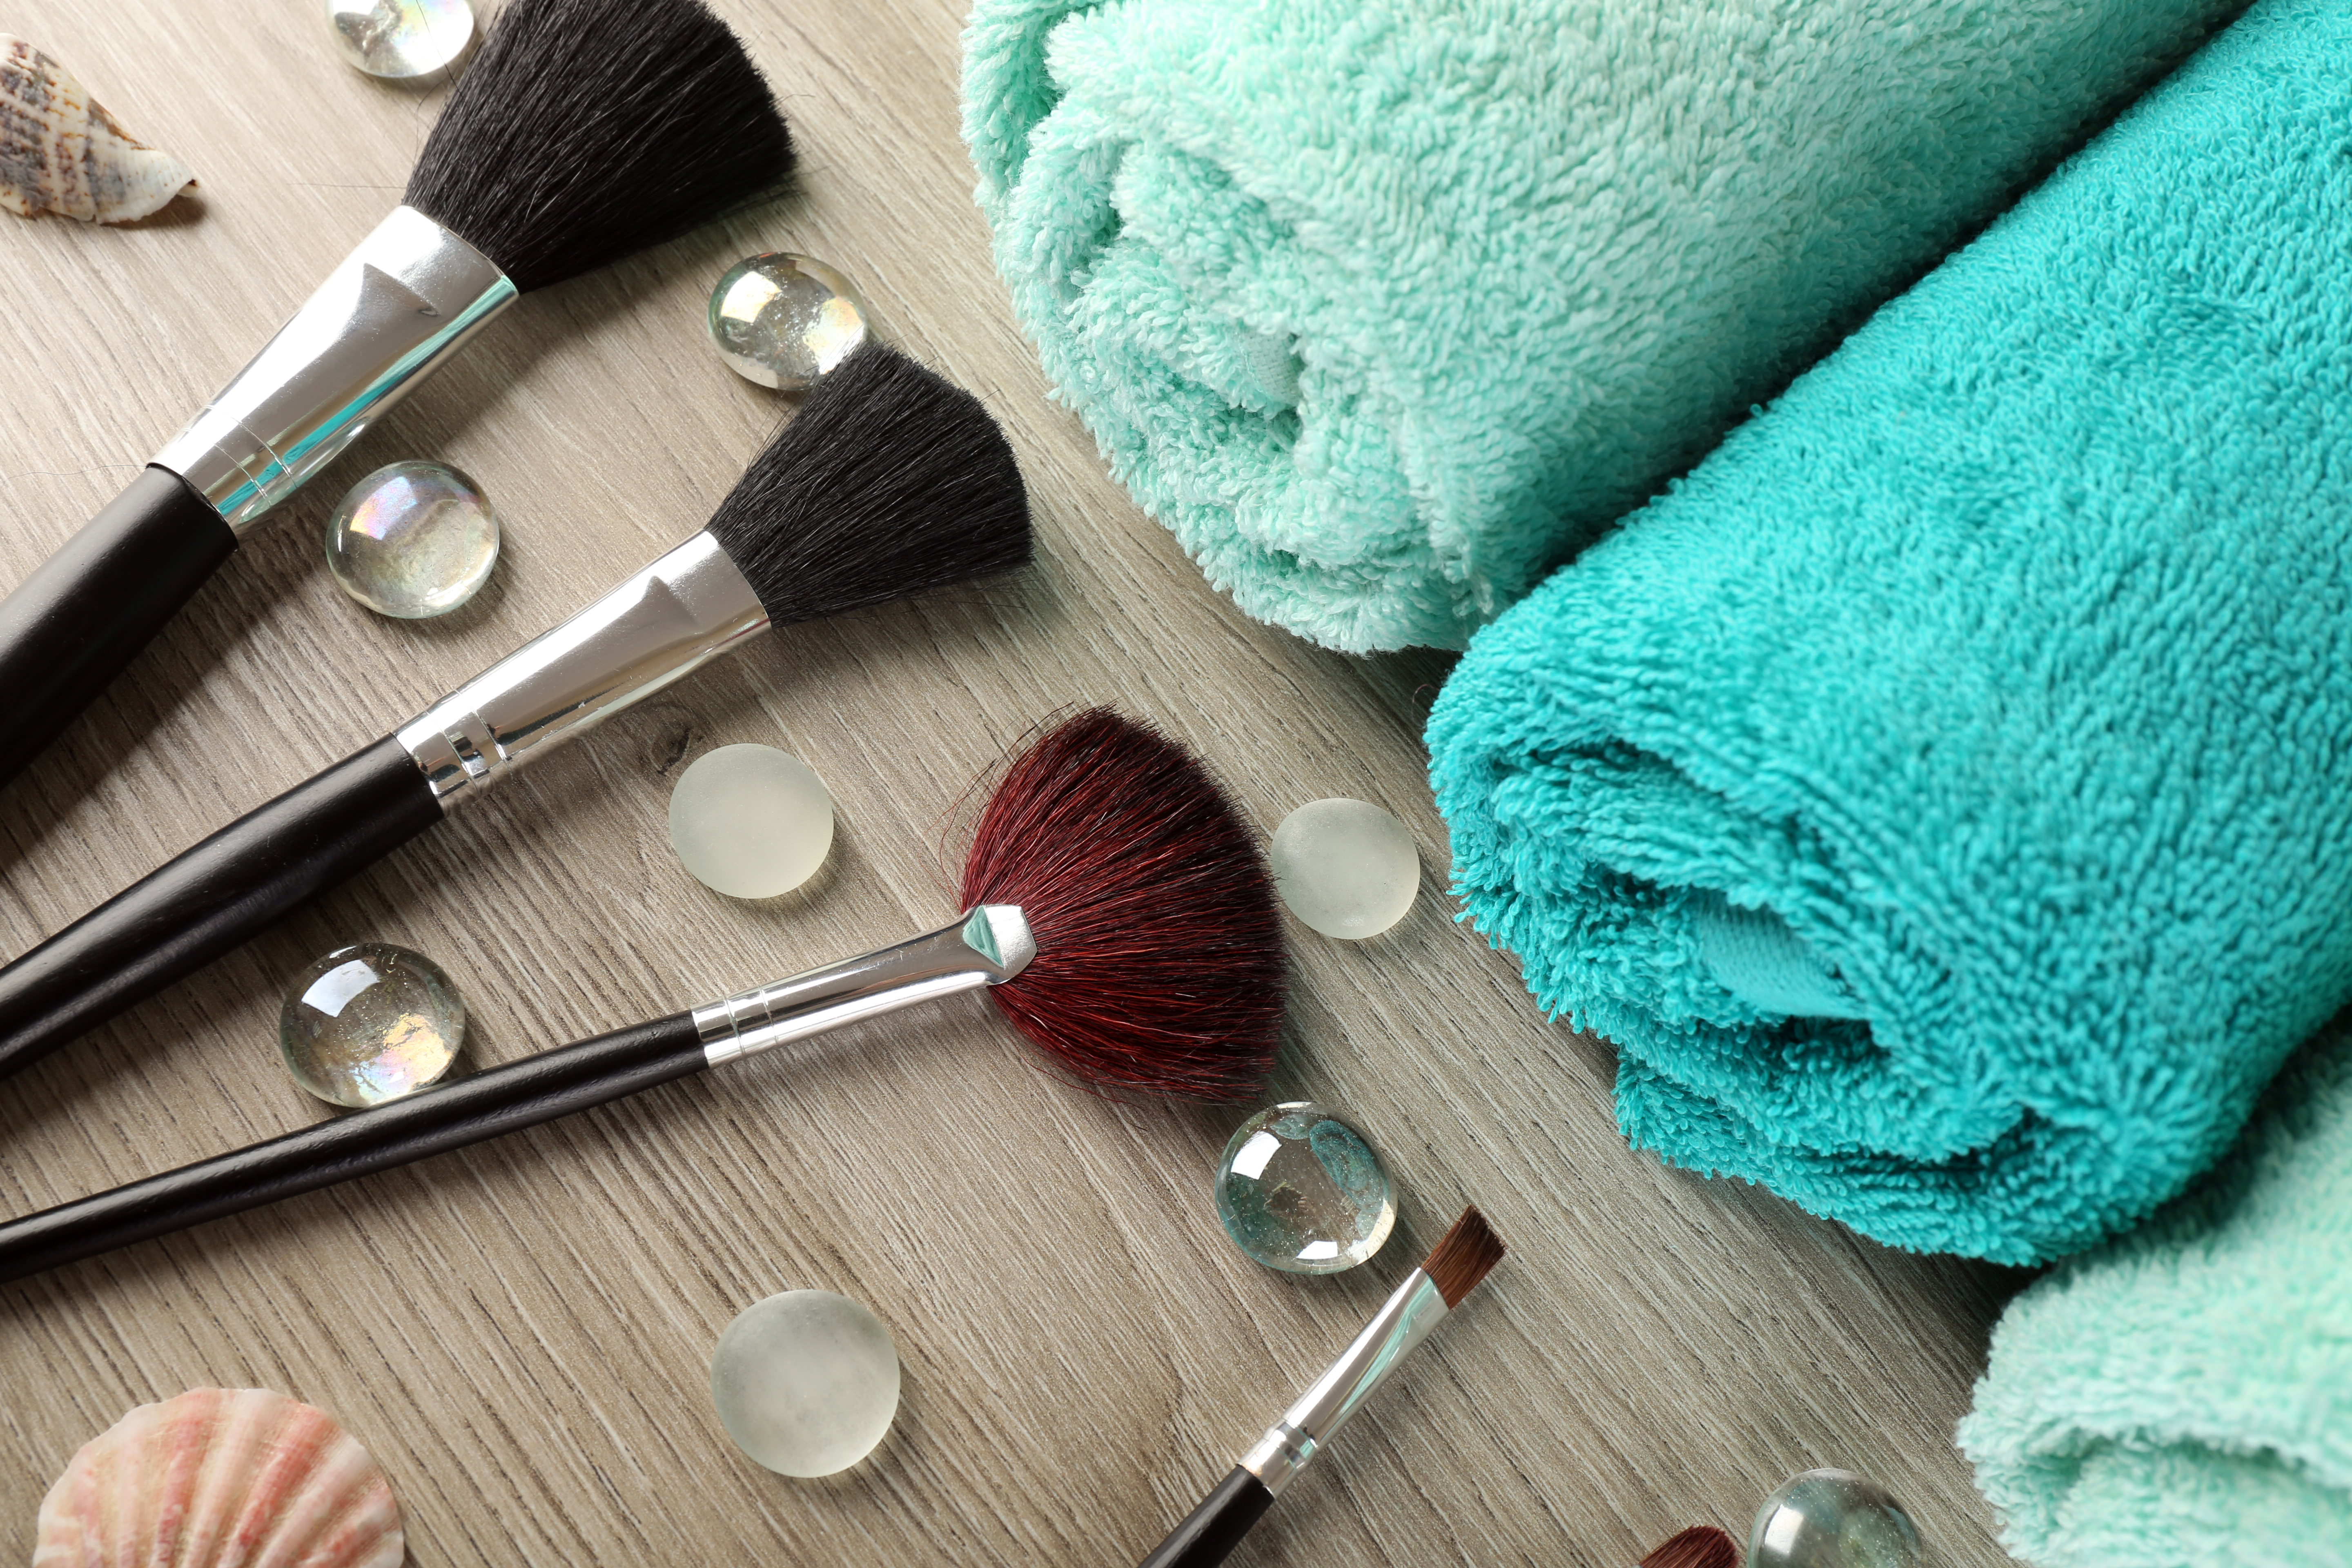 Makeup brushes spread across a counter opposite a row of rolled towels | Source: Shutterstock